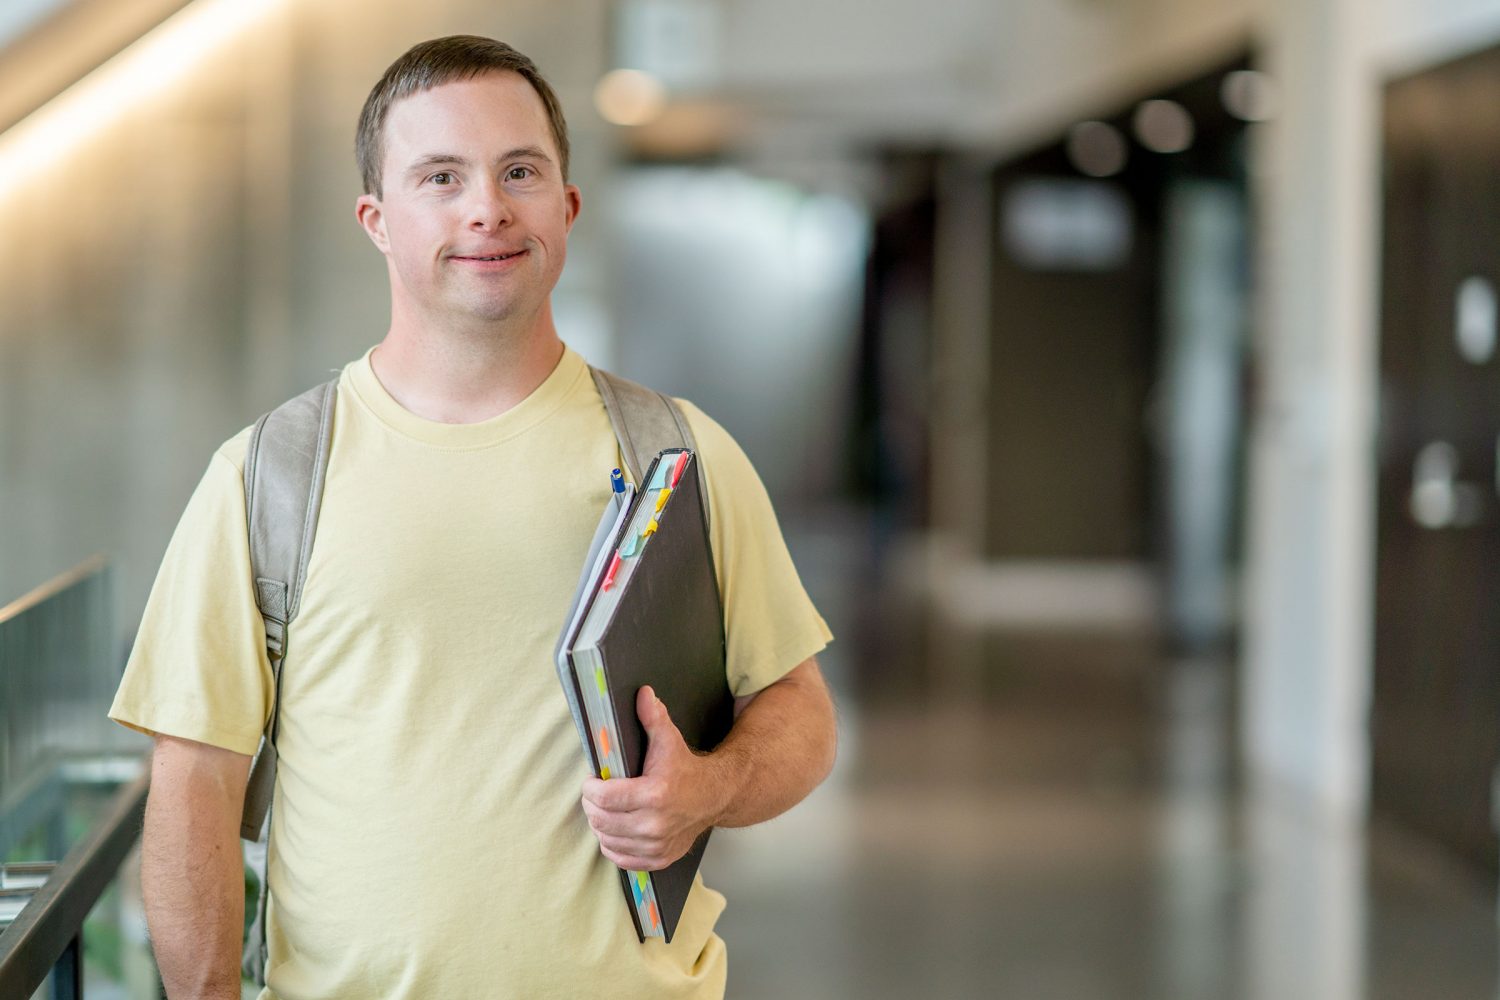 Young man with Down syndrome walks with book in school hallway